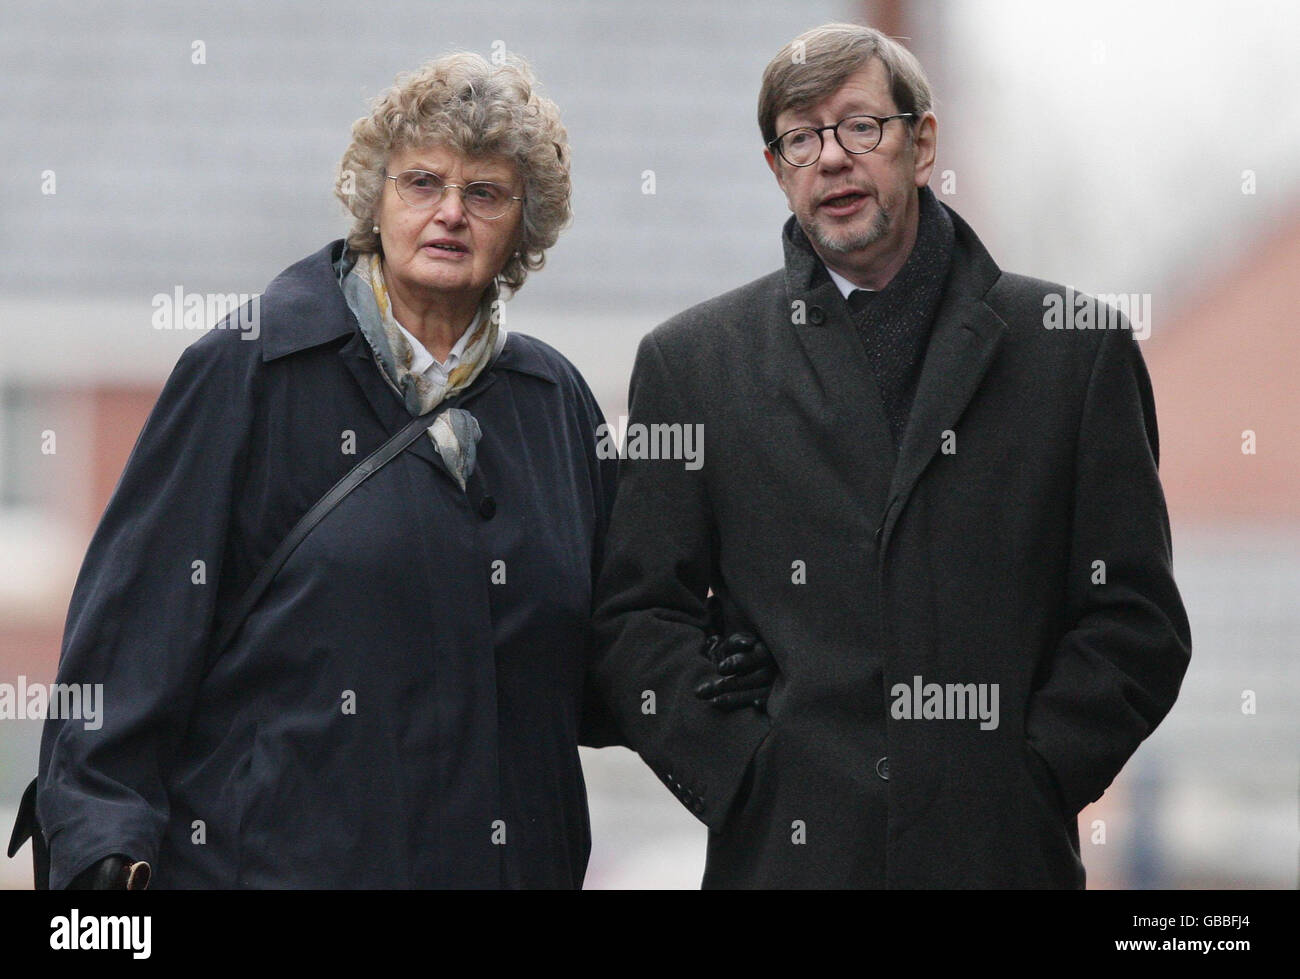 Jane Freeman and Mike Grady, who played Ivy and Barry in Last of the Summer Wine, arrive for actress Kathy Staff's funeral at St. Mark's Church in Dukinfield, Manchester. Stock Photo